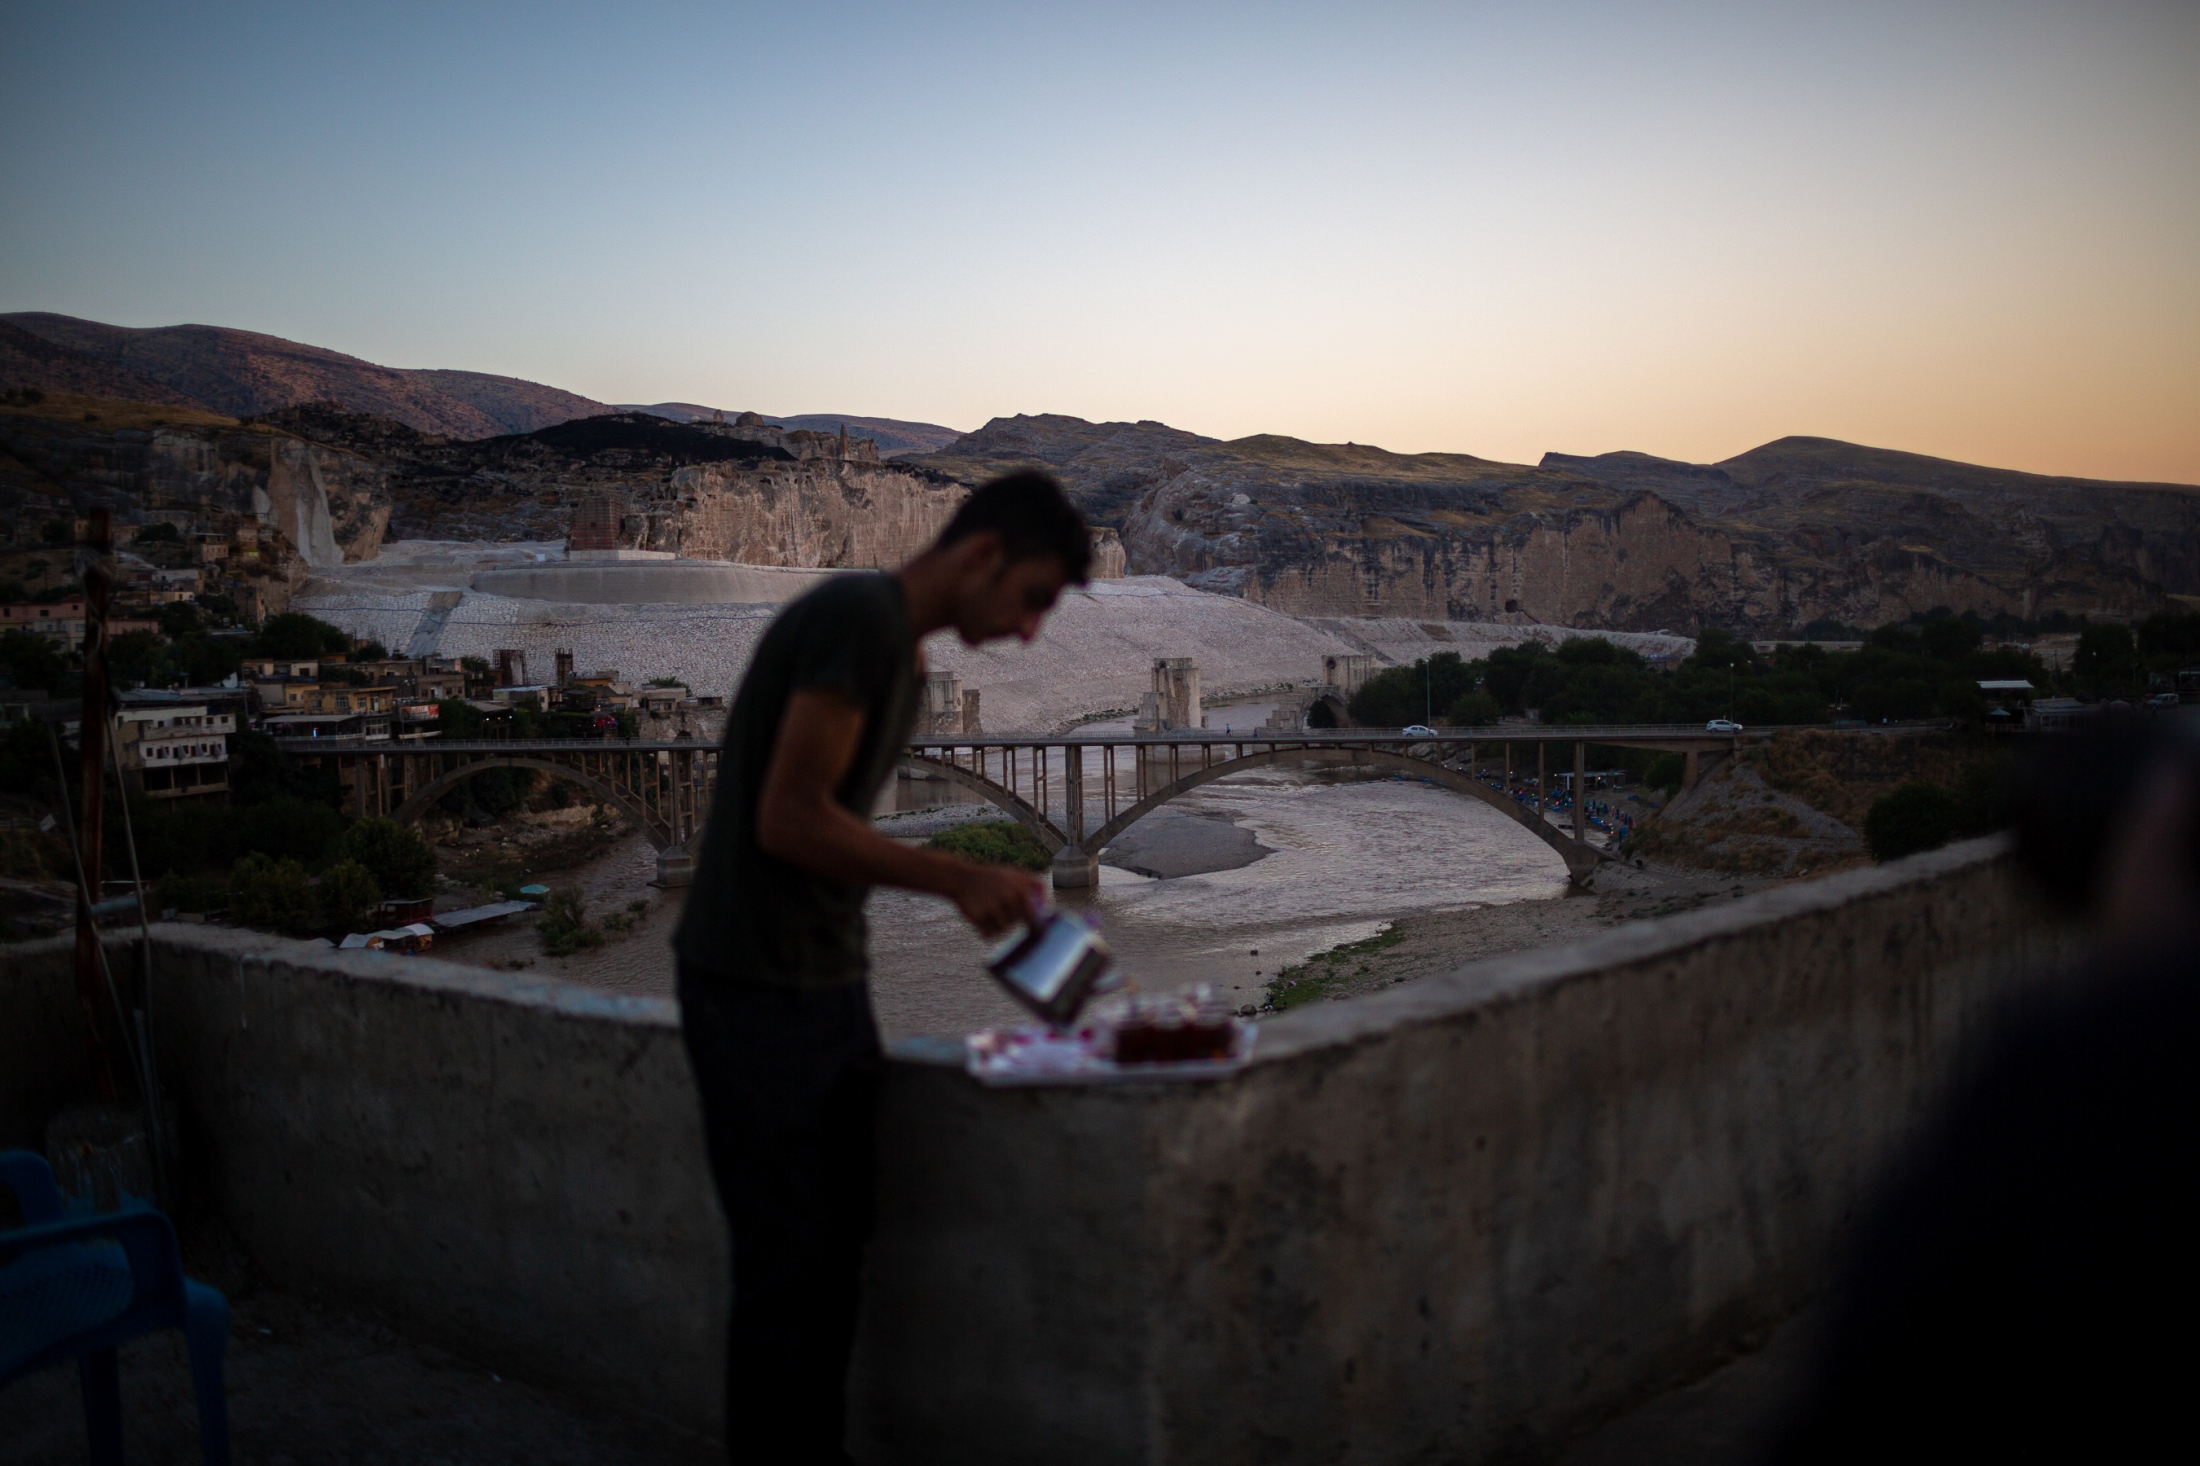 While tea is being served, in the background the 12,000 year old village of Hasankeyf awaits its submersion under the waters of Ilisu Dam. As of mid August 2019, the dam&#39;s floodgates have been closed and the water has started to accumulate in the reservoir some 100 kilometers downstream. It will take some time before the water arrive at Hasankeyf which will result in it being more than 80% submerged. As of early October 2019, the roads to the village will be closed and all residents will have to have left the village.